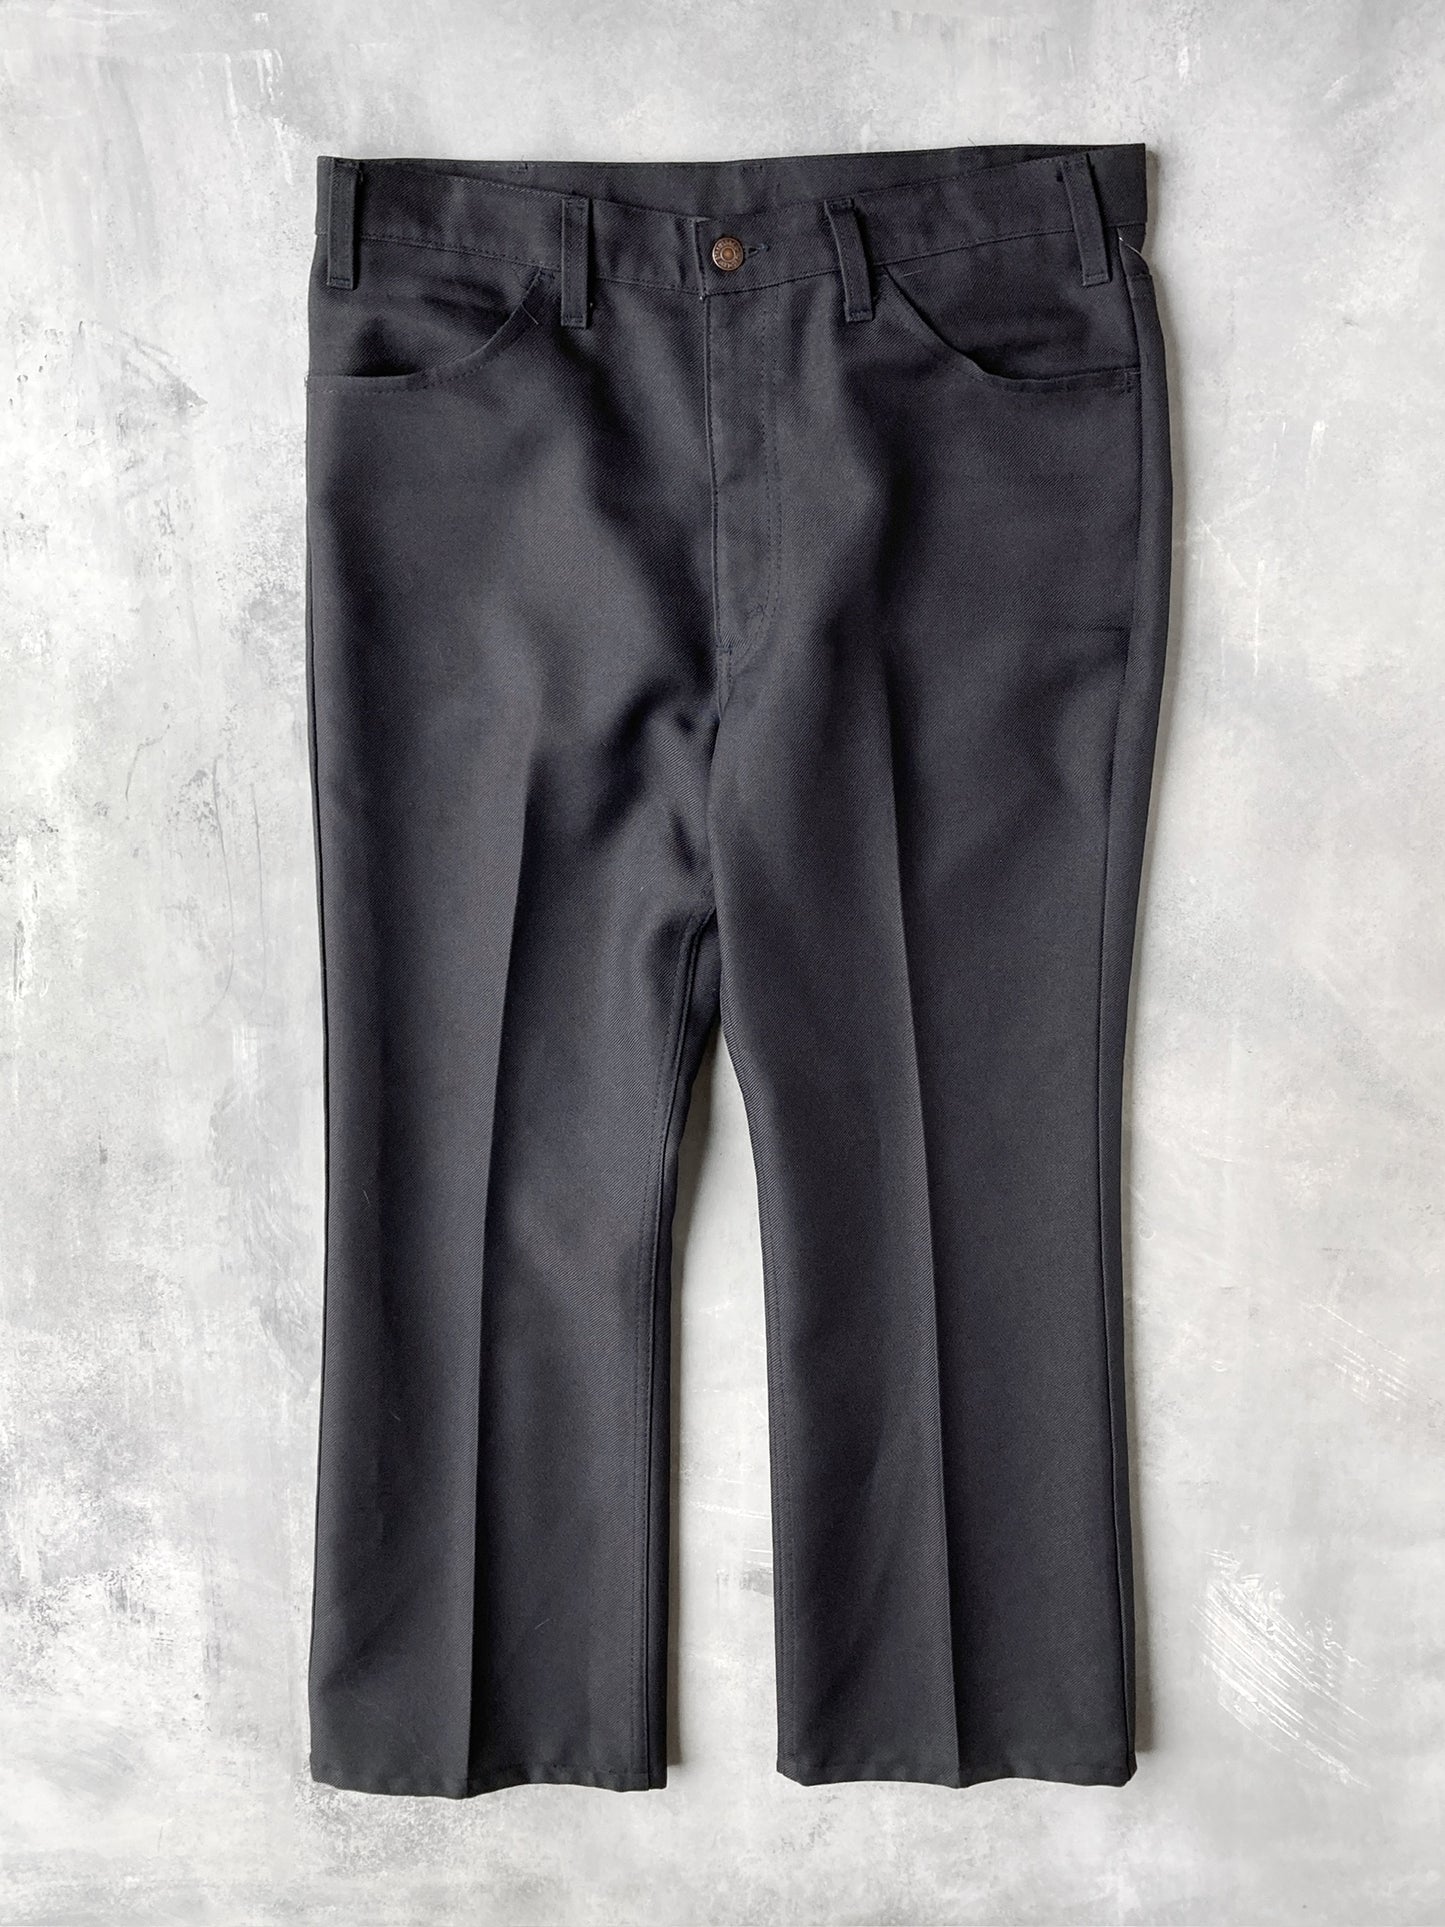 Levi's Polyester Twill Pants 70's - 35 x 28